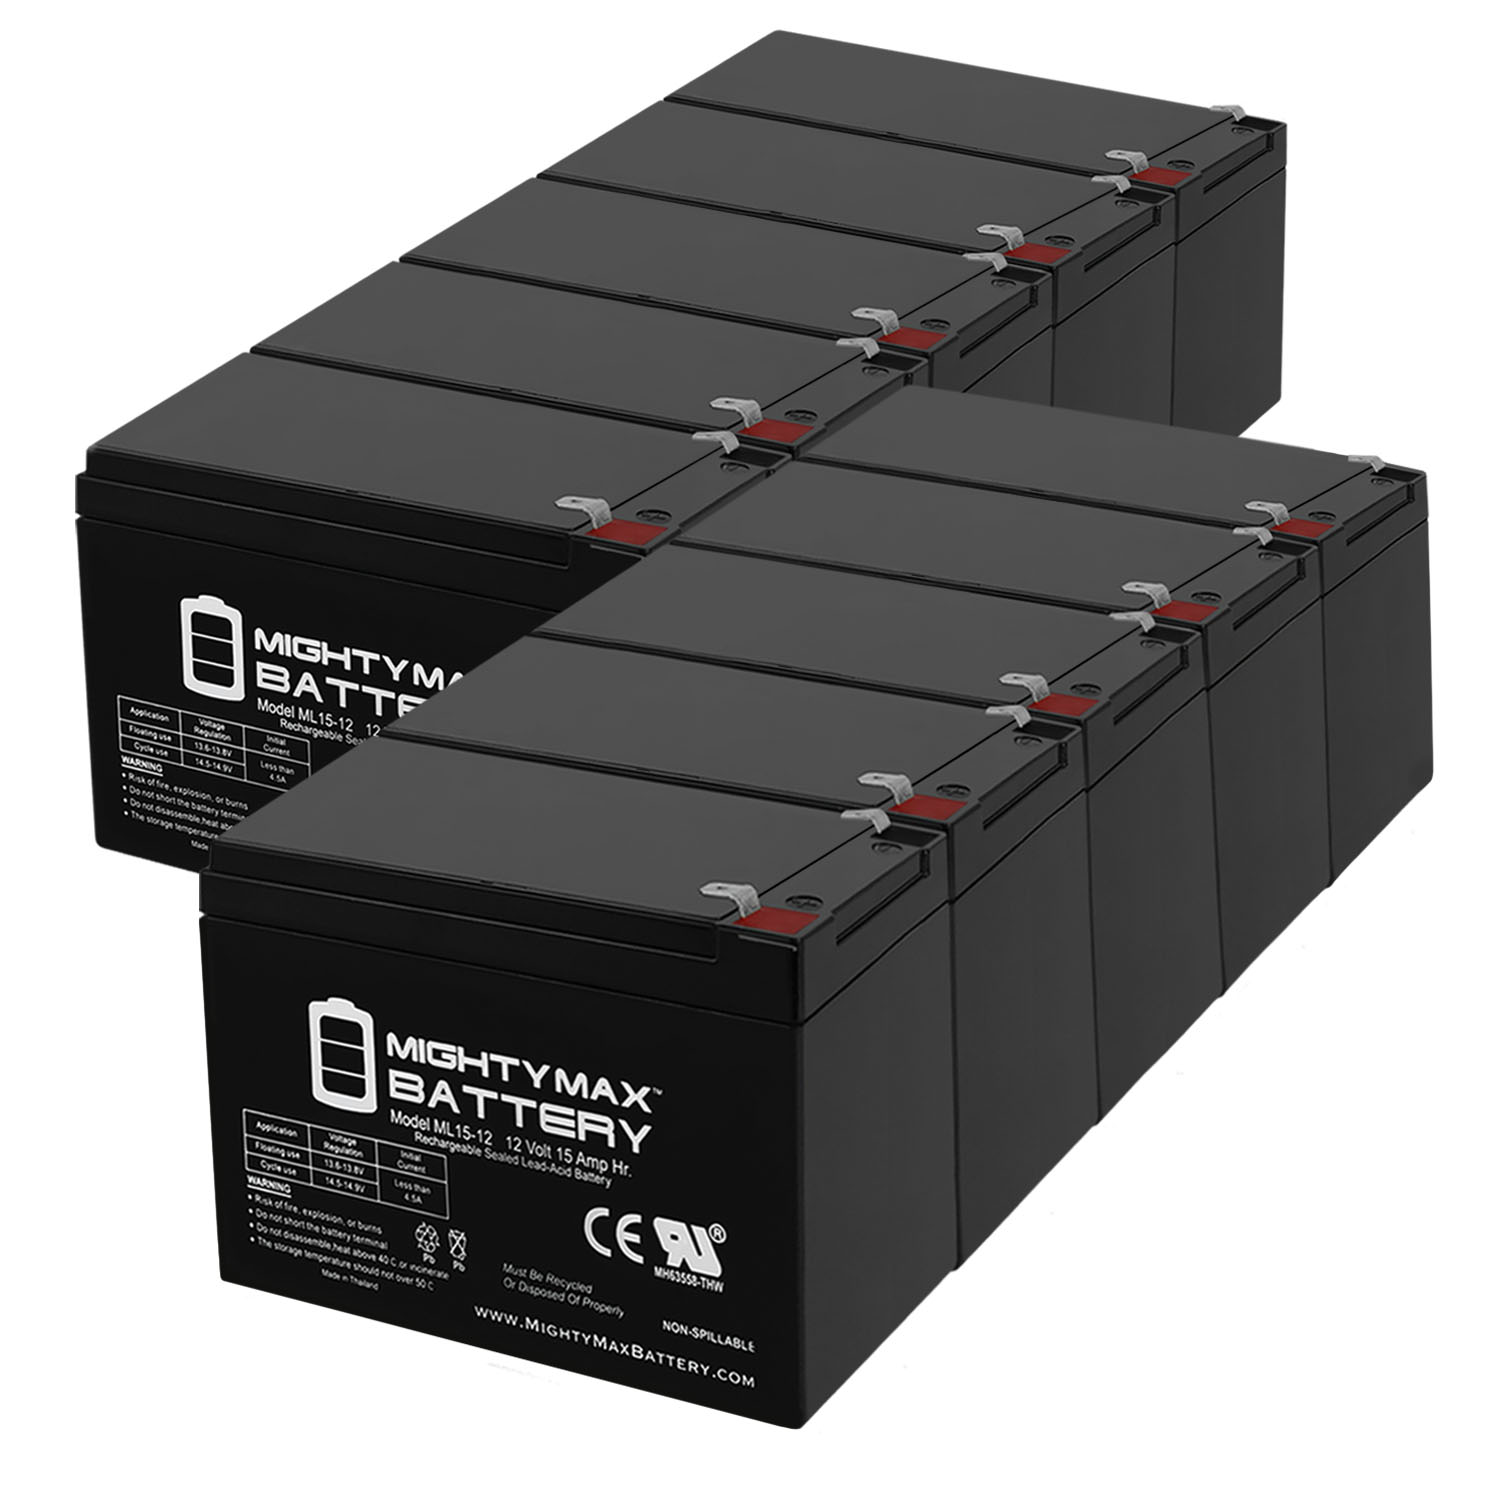 ML15-12 12V 15AH F2 BATTERY REPLACEMENT FOR Bladez PB-SM808, PB-SM 808 - 10 Pack